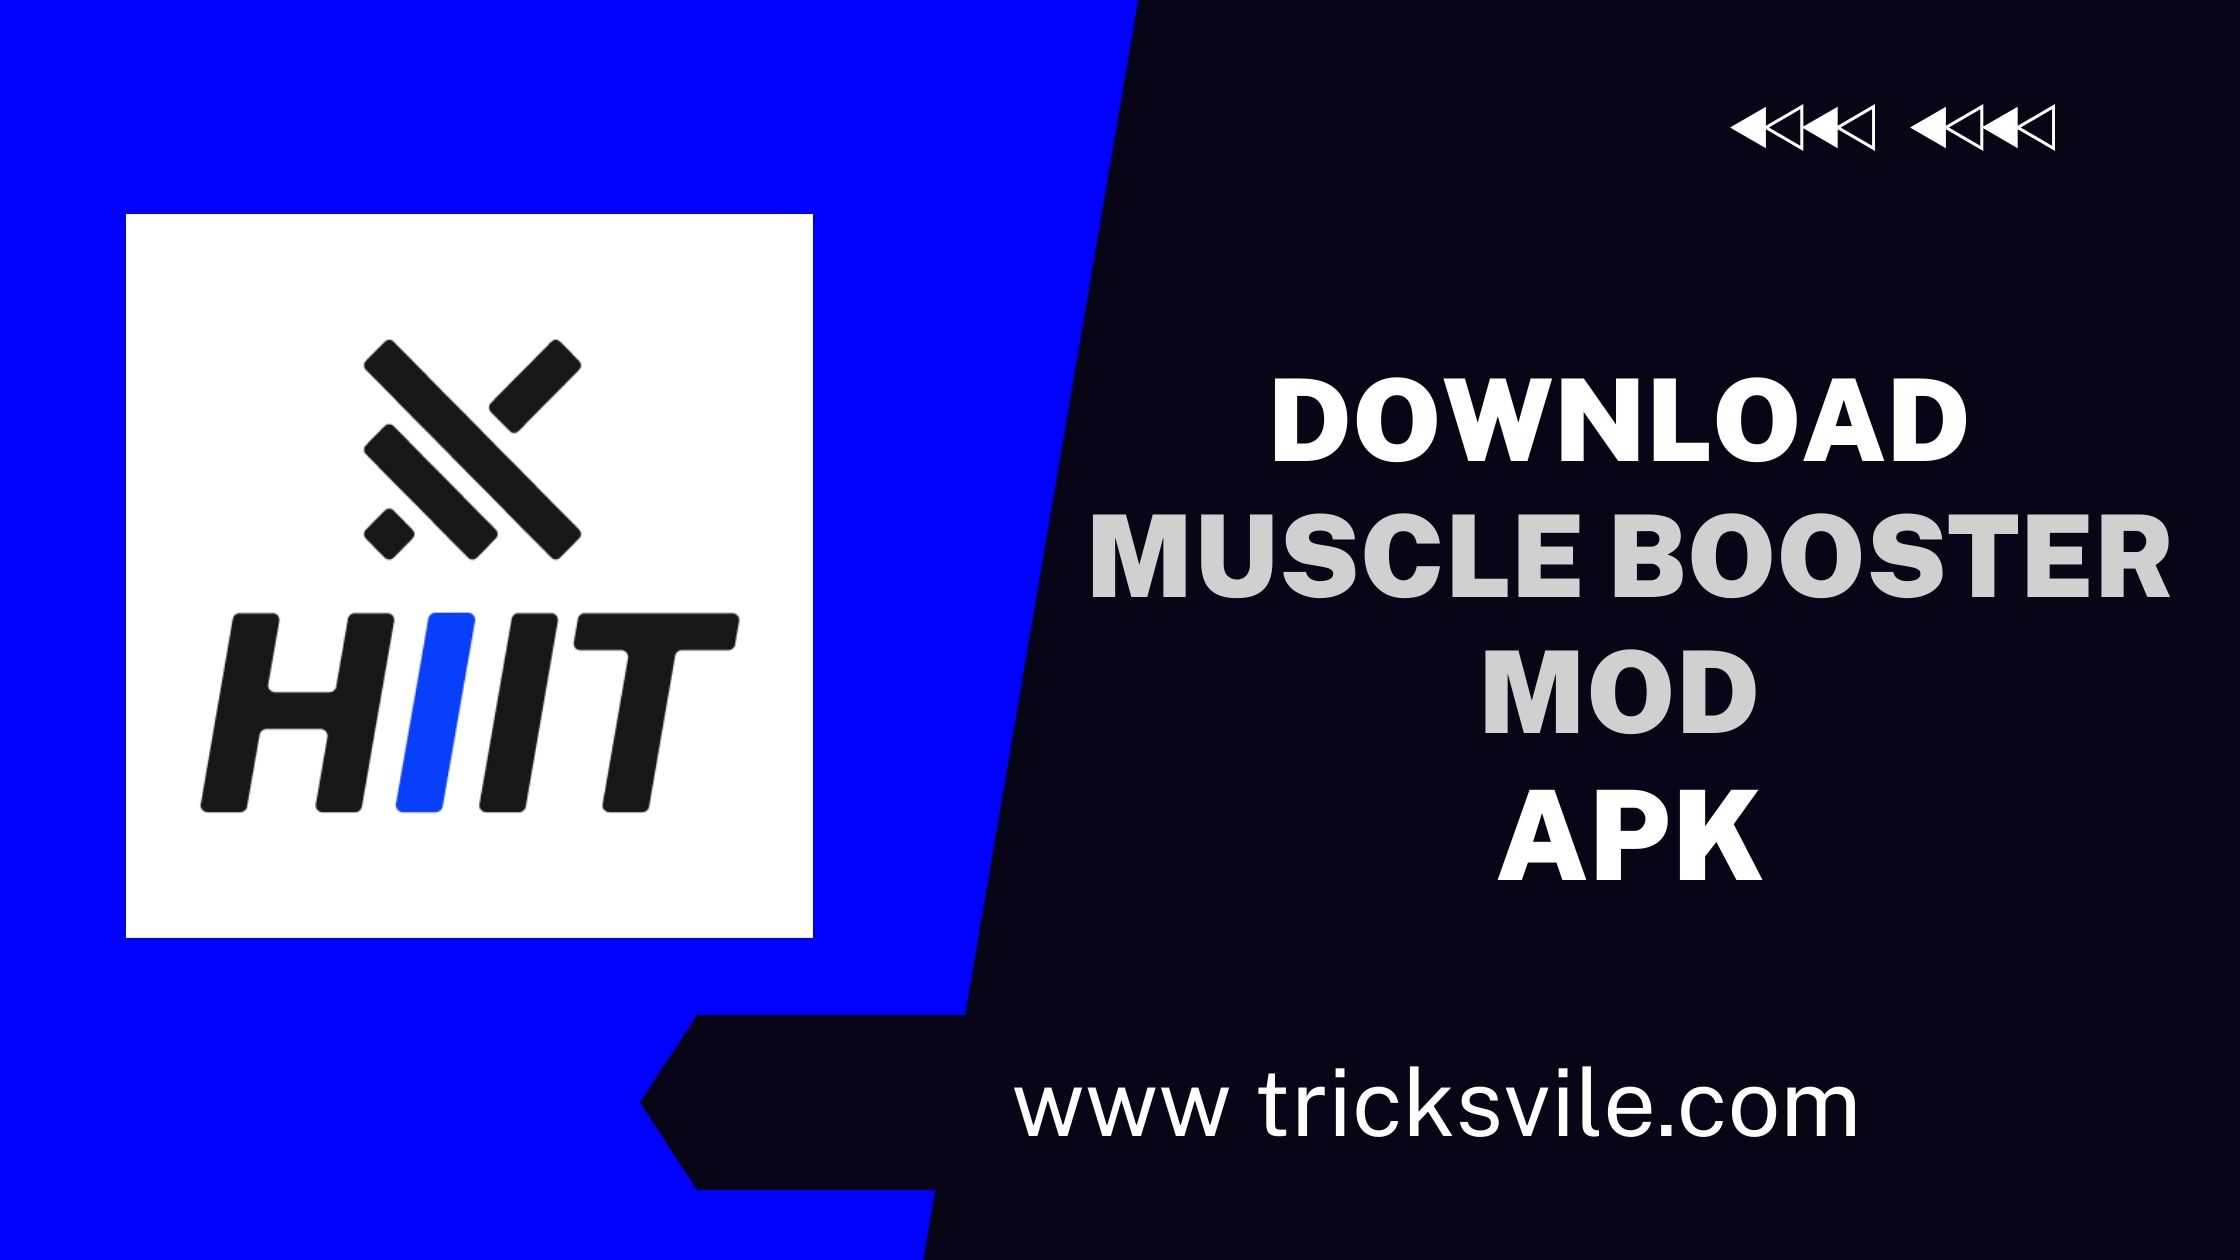 Muscle Booster MOD APK